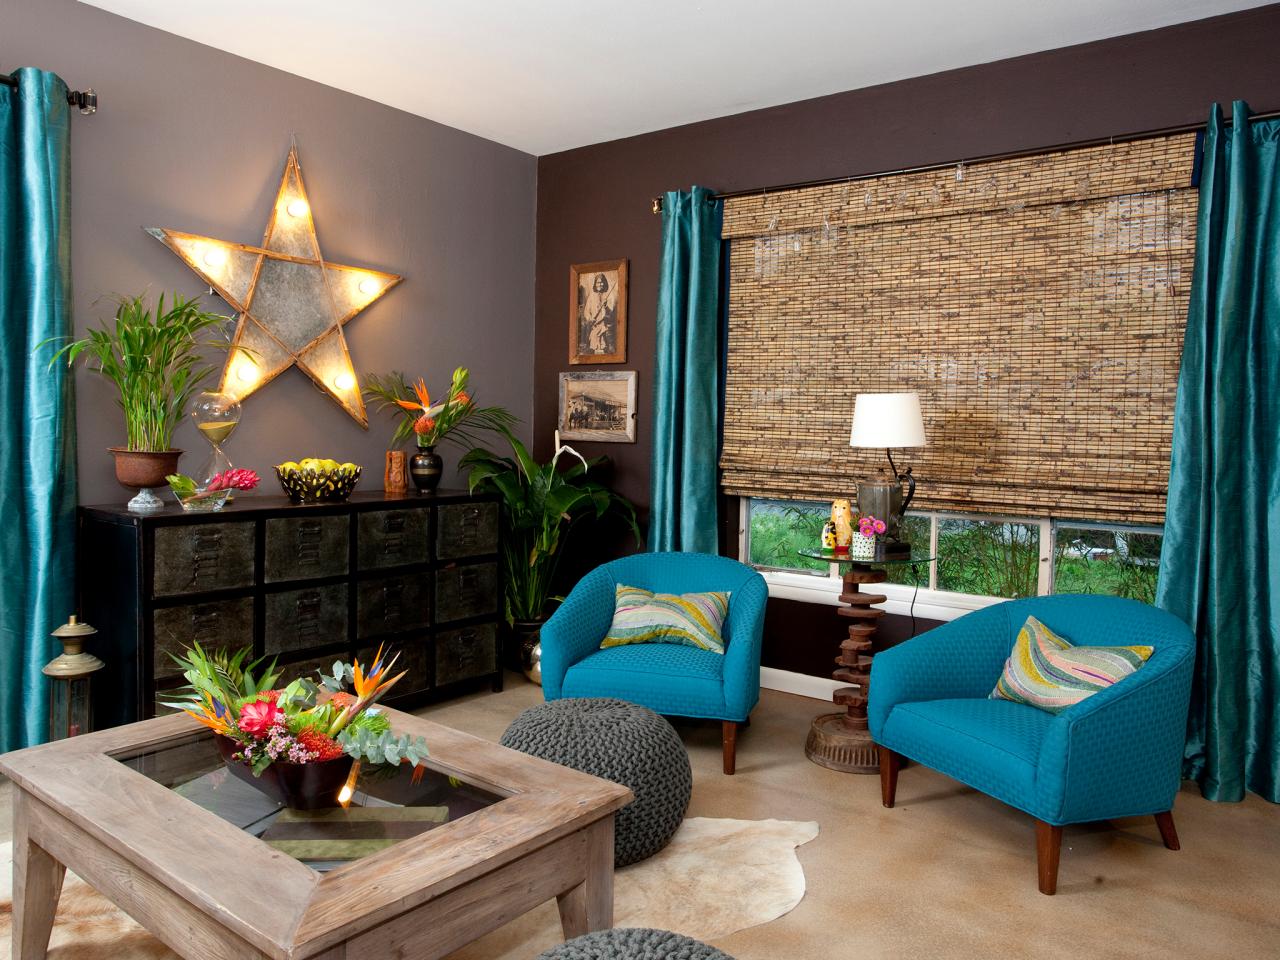 Imaginative living room in teal and light brown